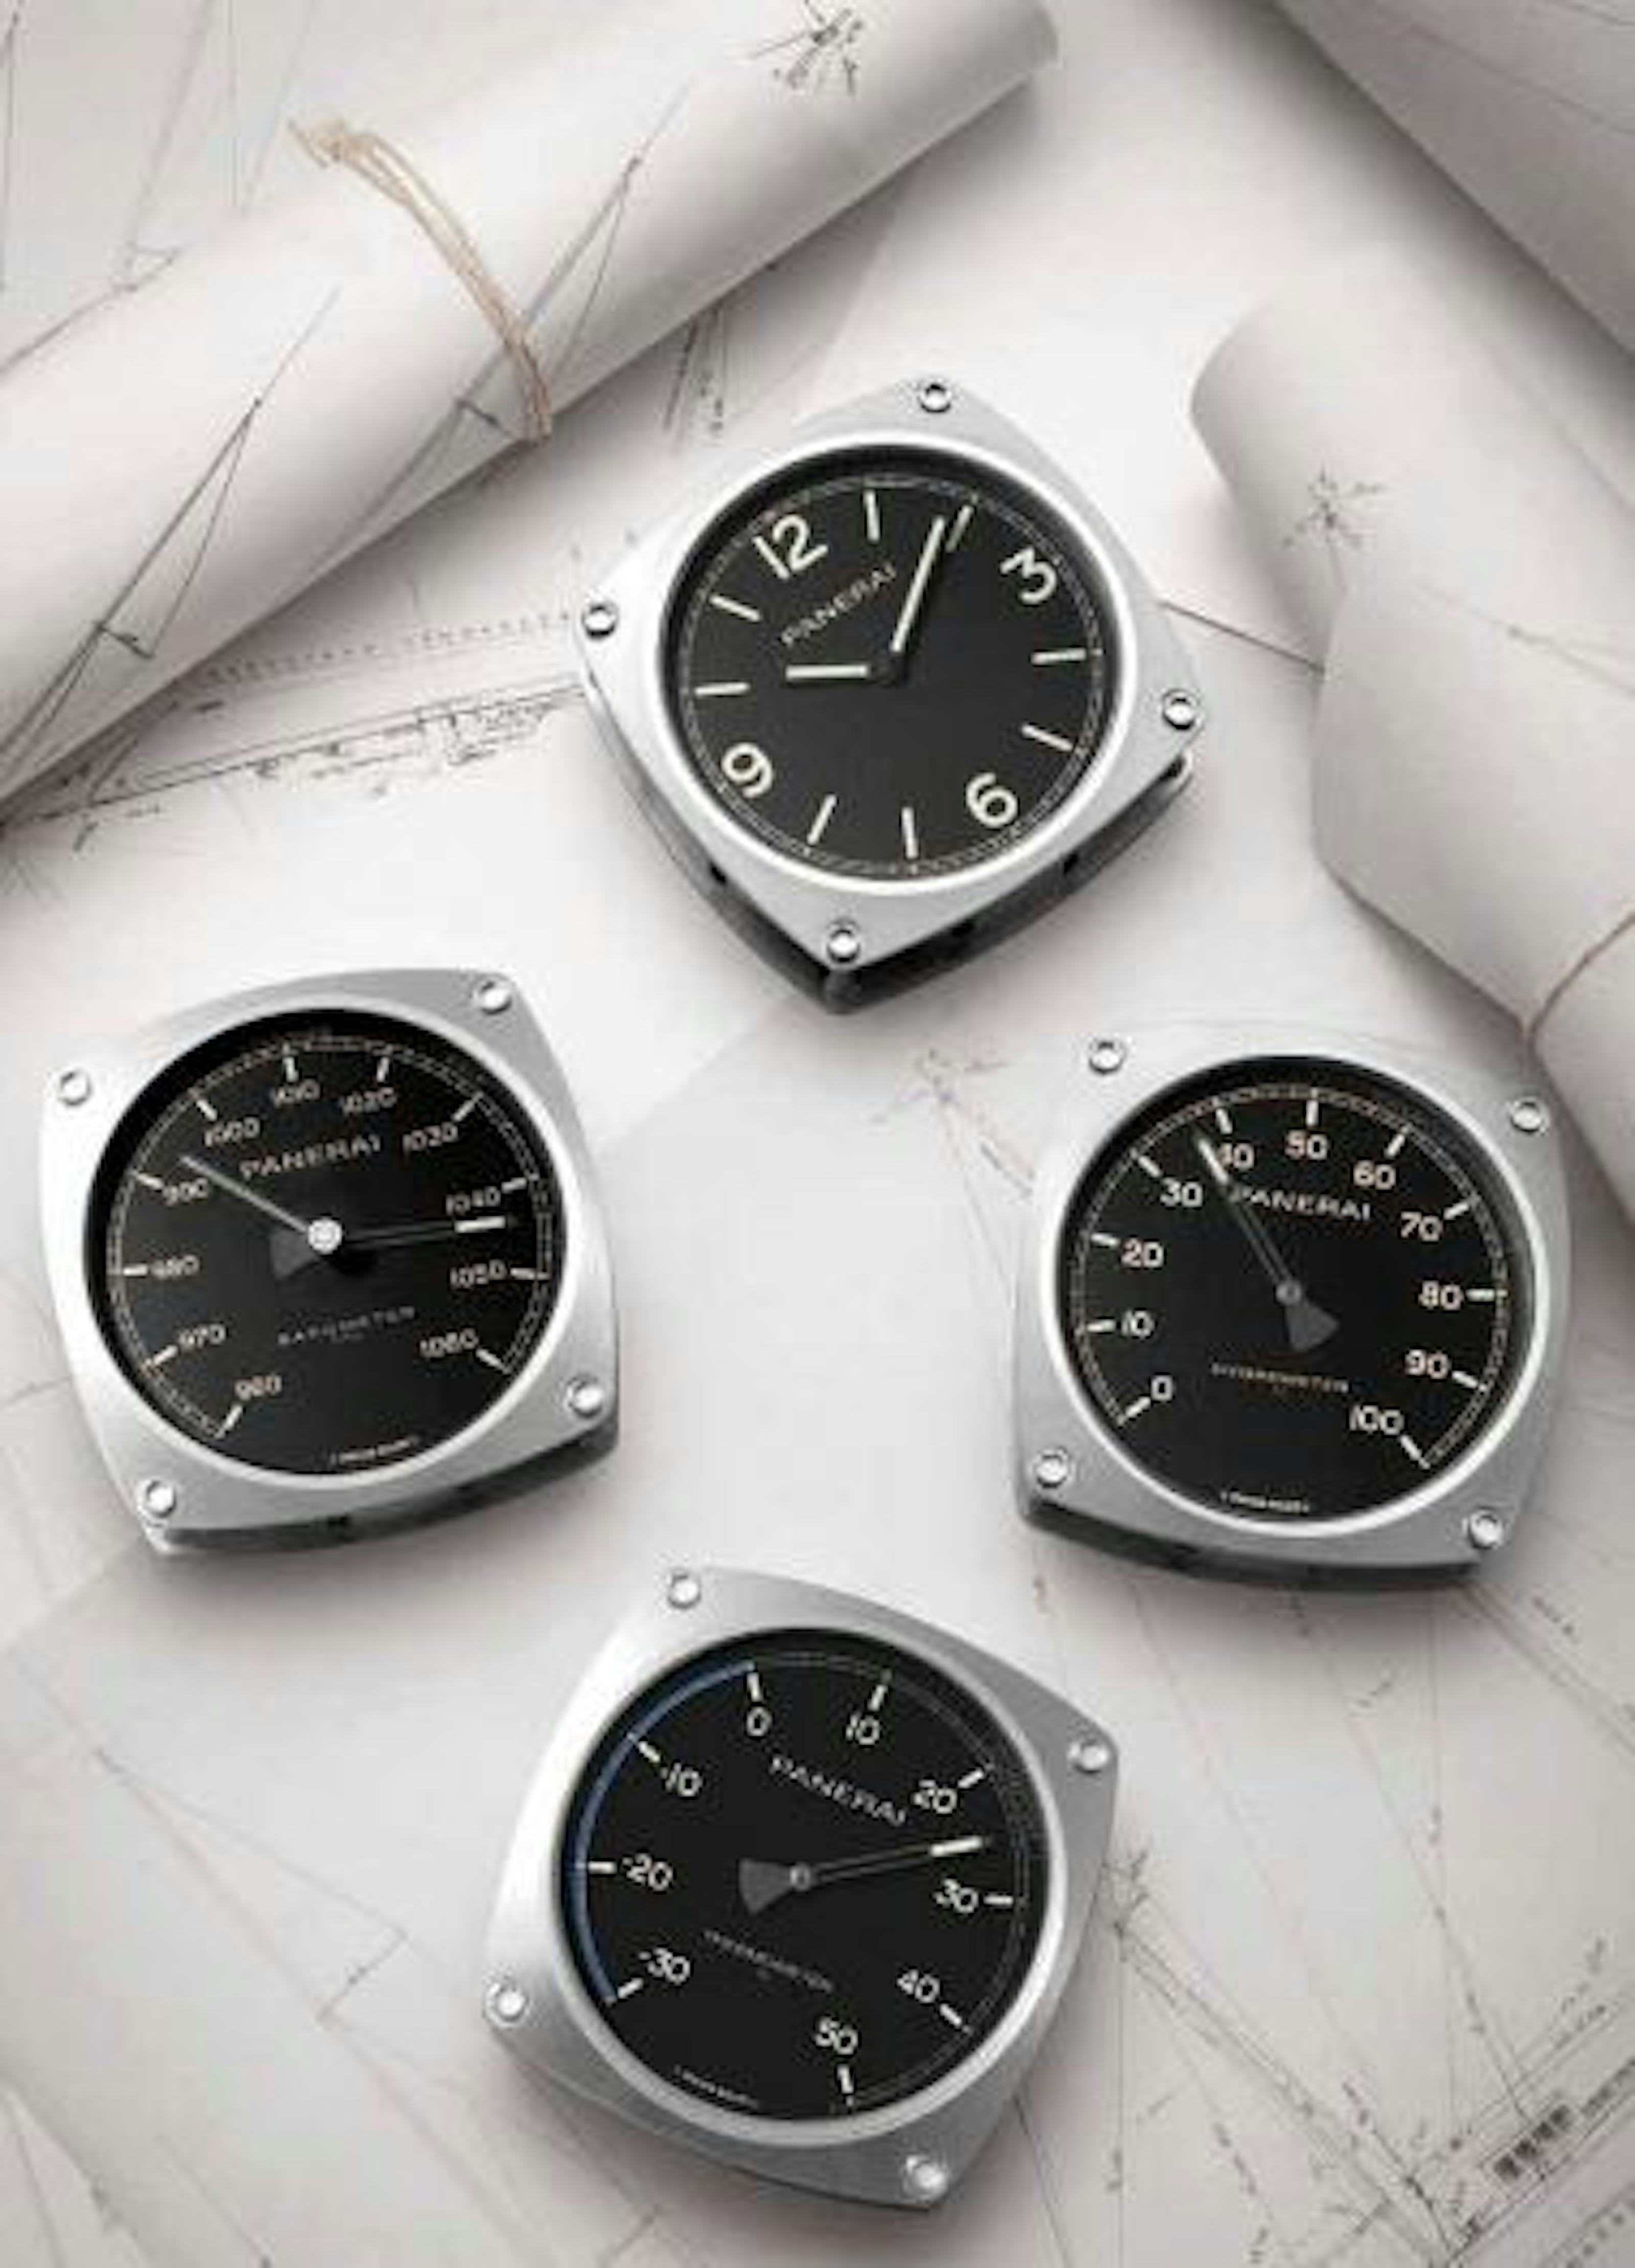 Deck Dials: Panerai Created Precision Instruments For The Seafarer Within